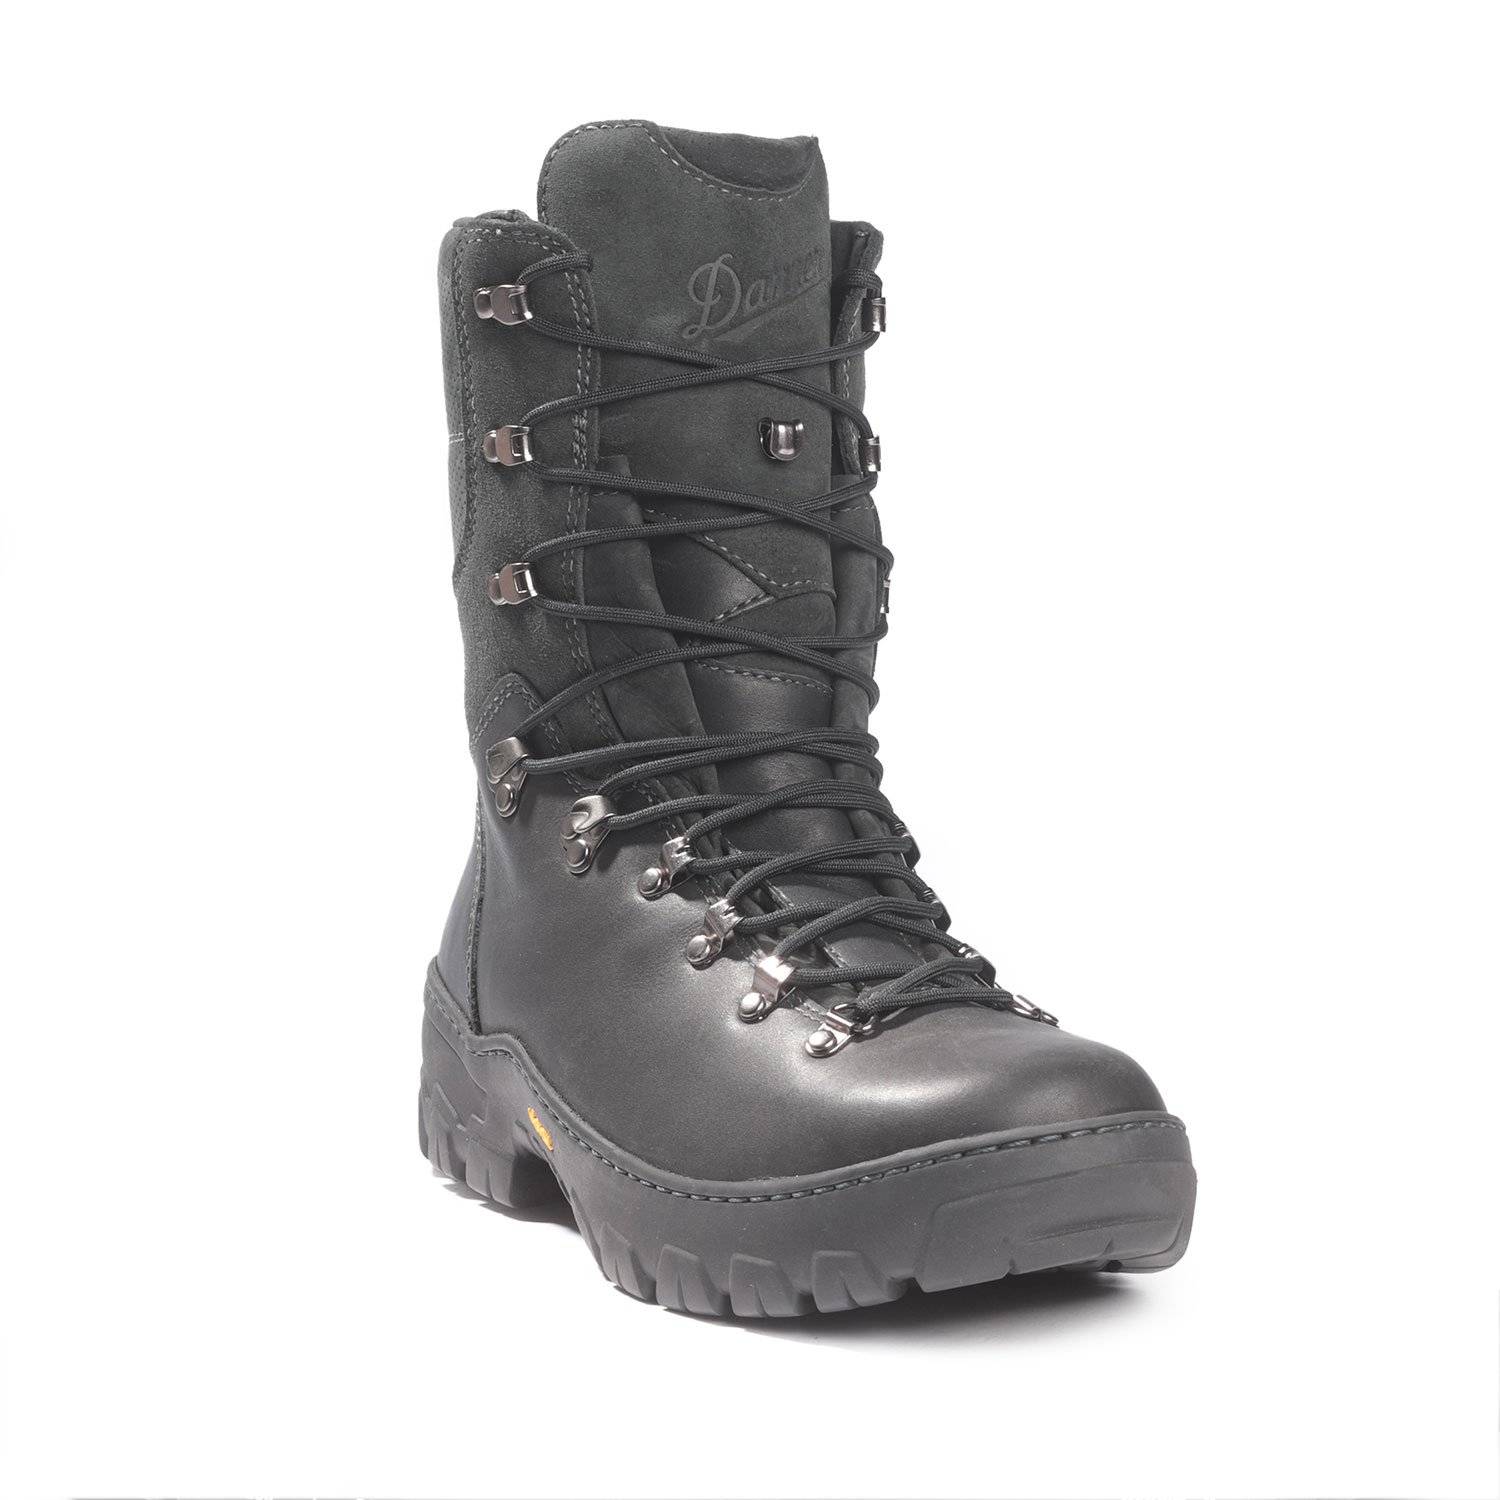 Danner Leather Wildland Tactical Firefighter Boot